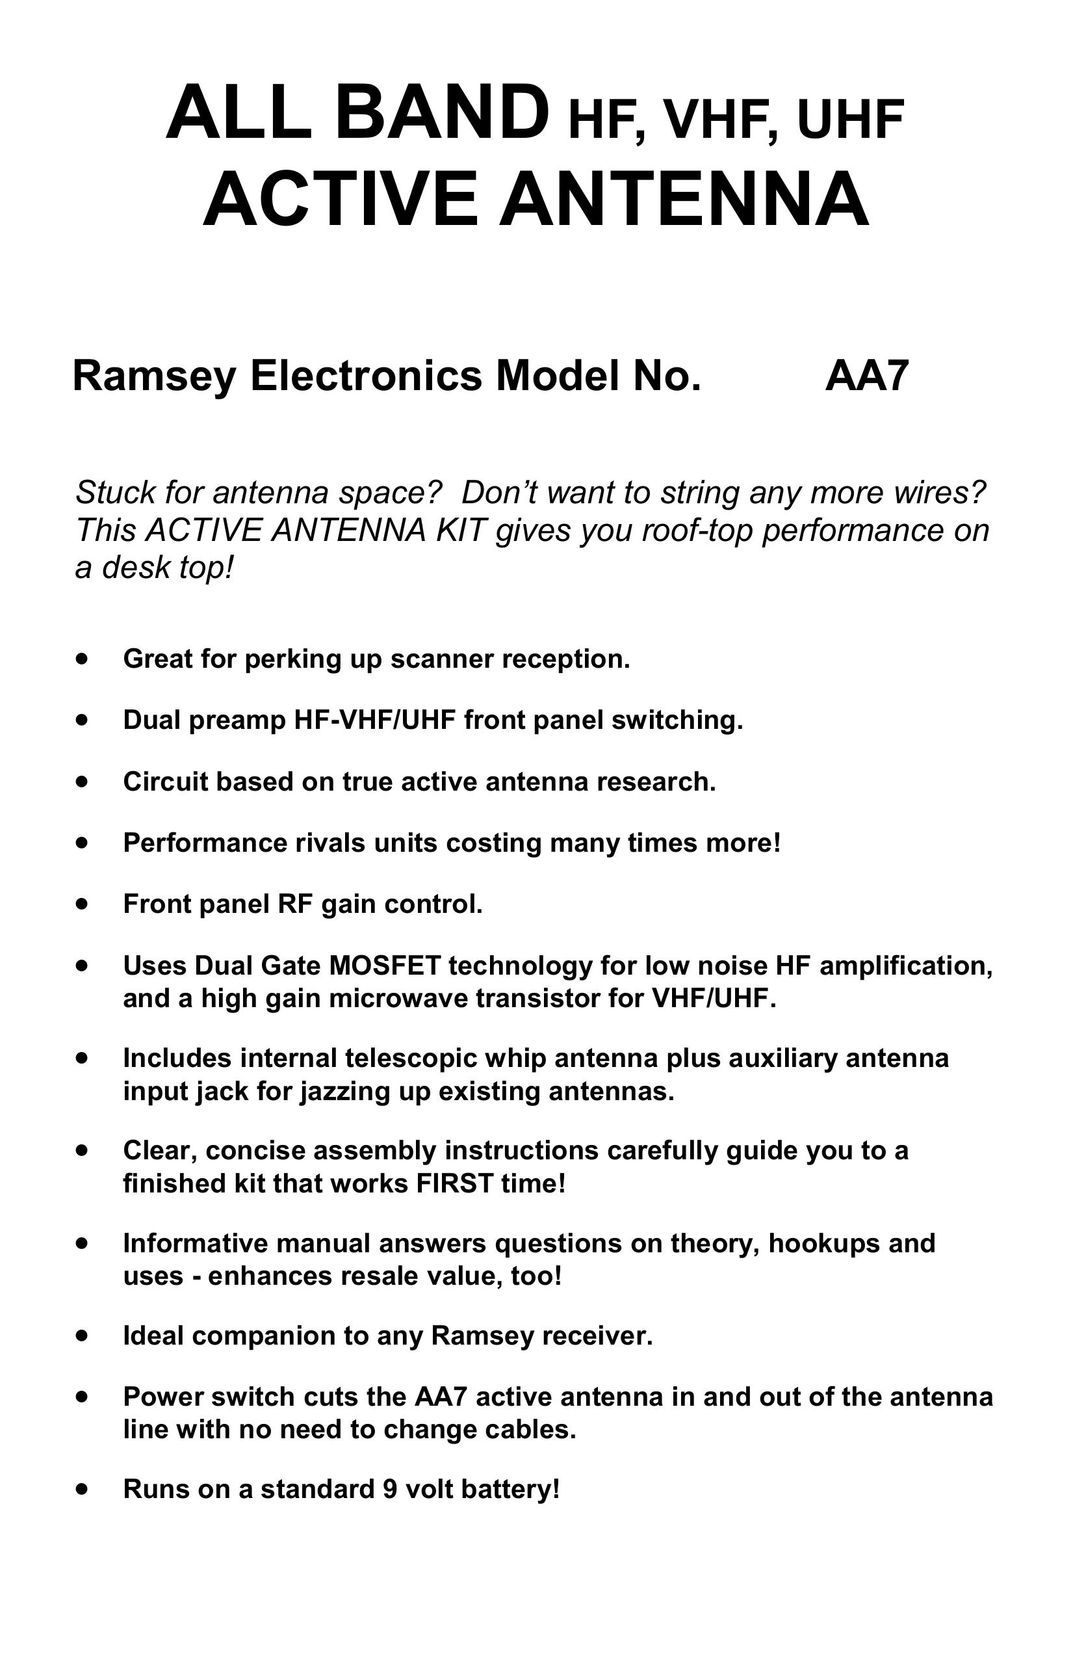 Ramsey Electronics AA7 Stereo System User Manual